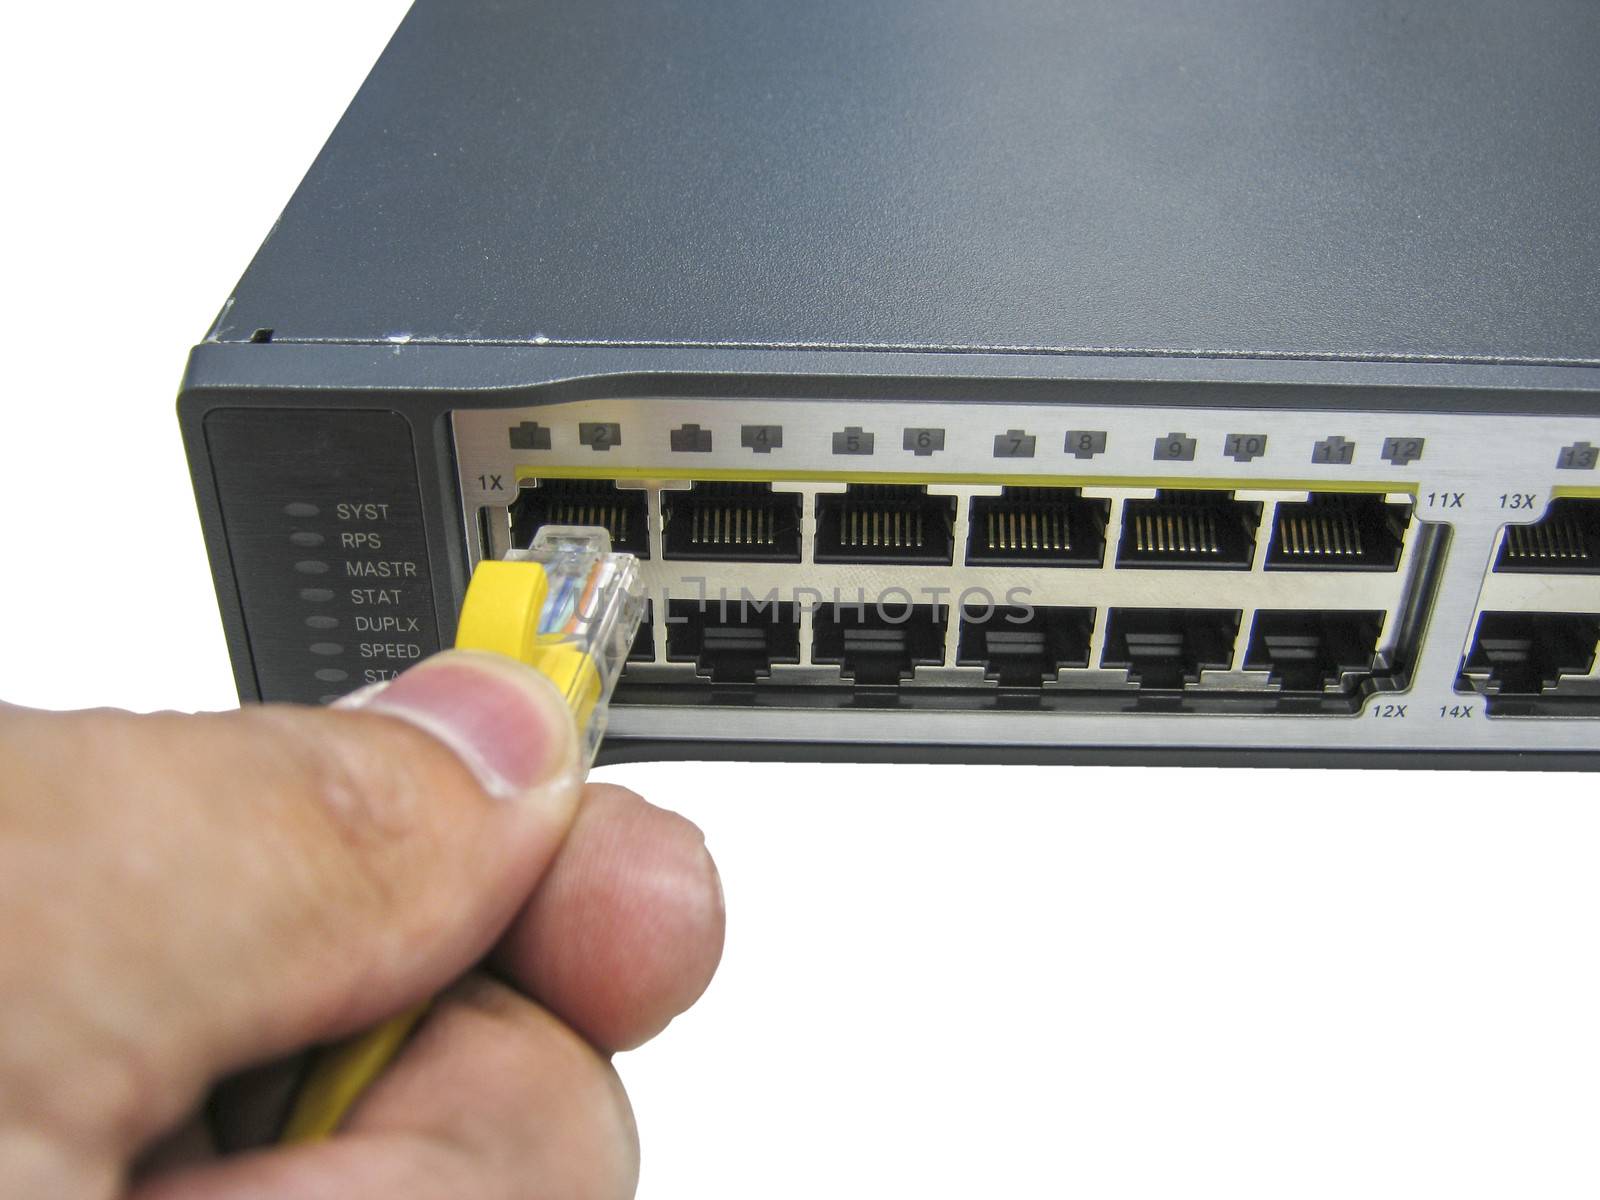 hand with ethernet cables connected to servers by Sorapop